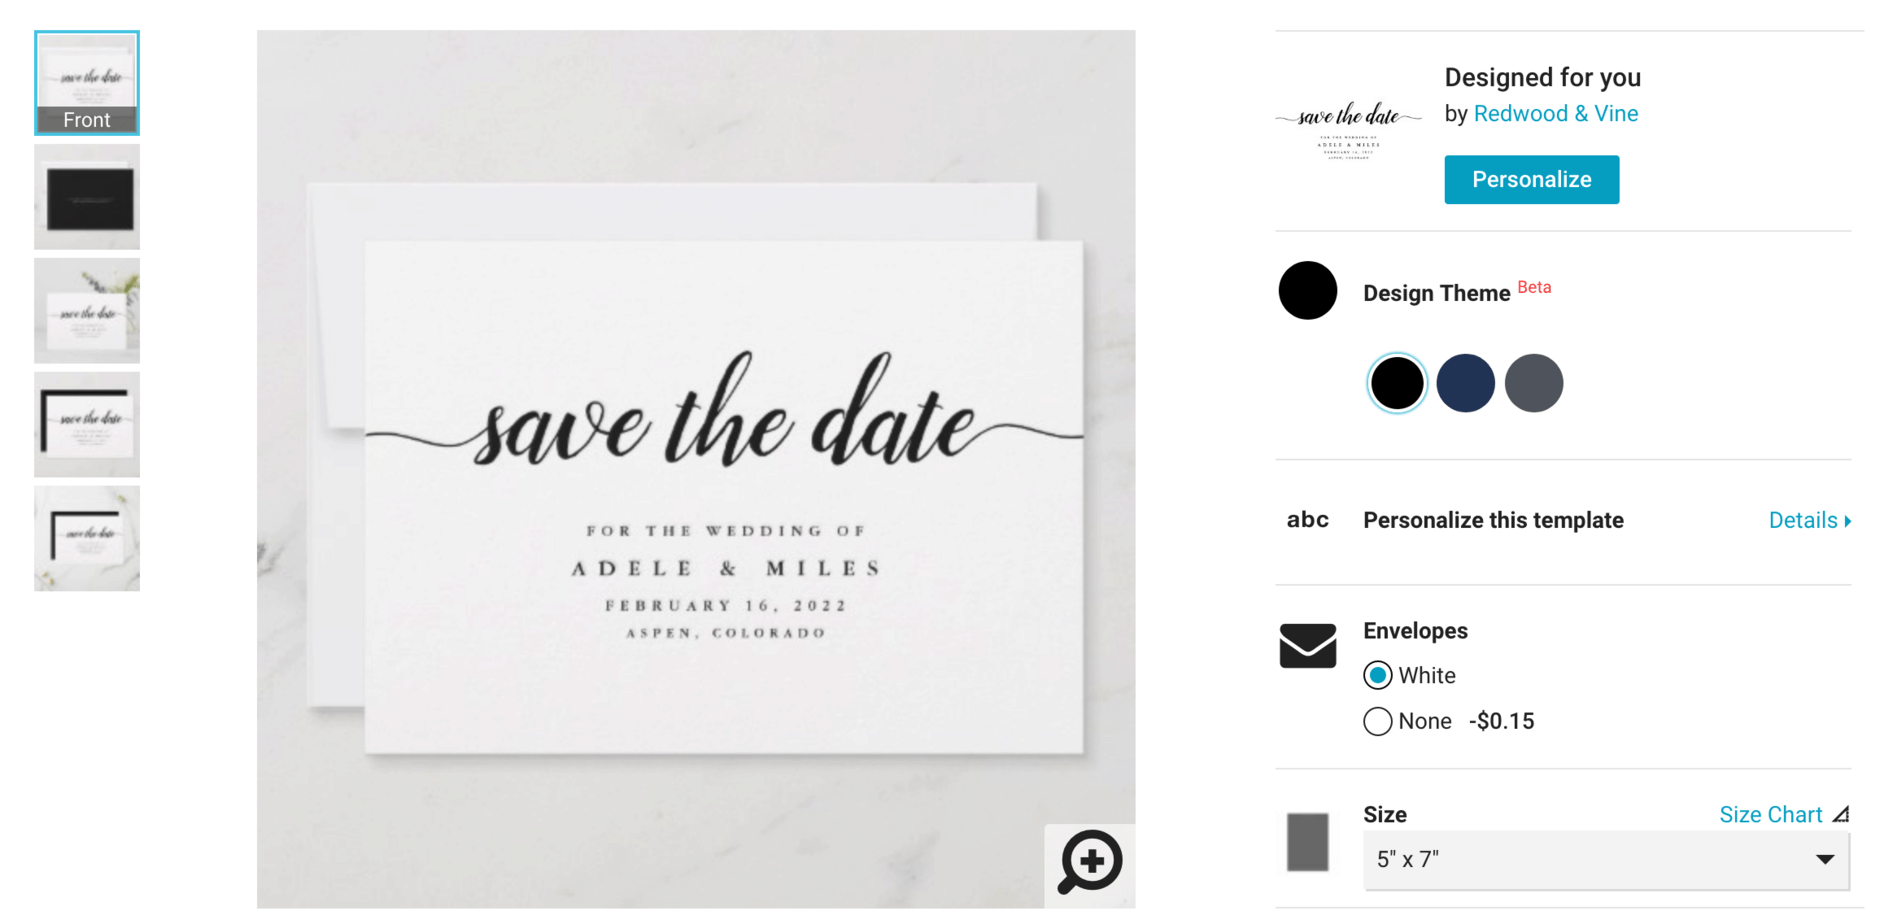 sell more on Zazzle: This color option shows the black text version for the save the date